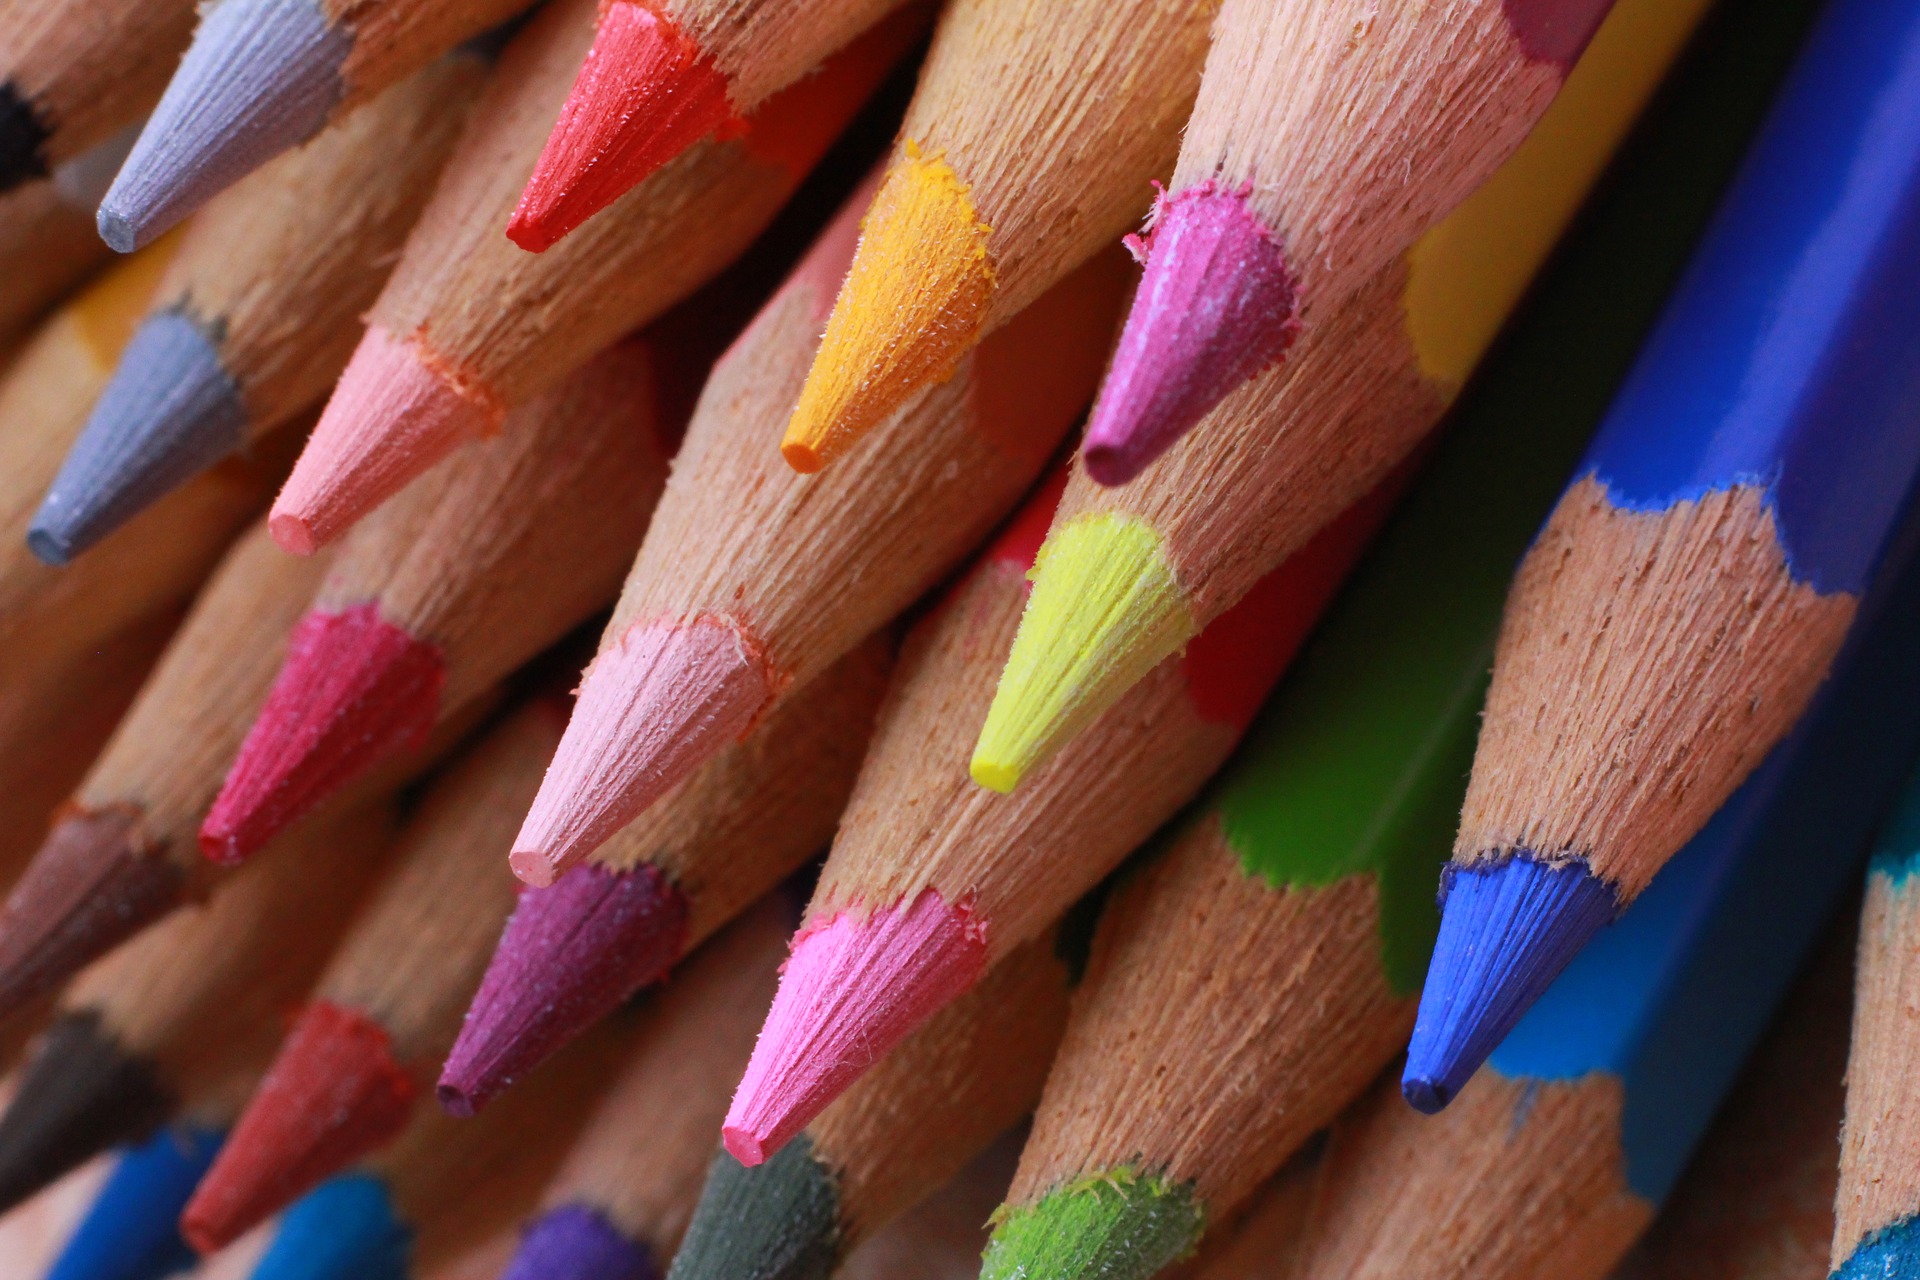 A photo of colored pencils.